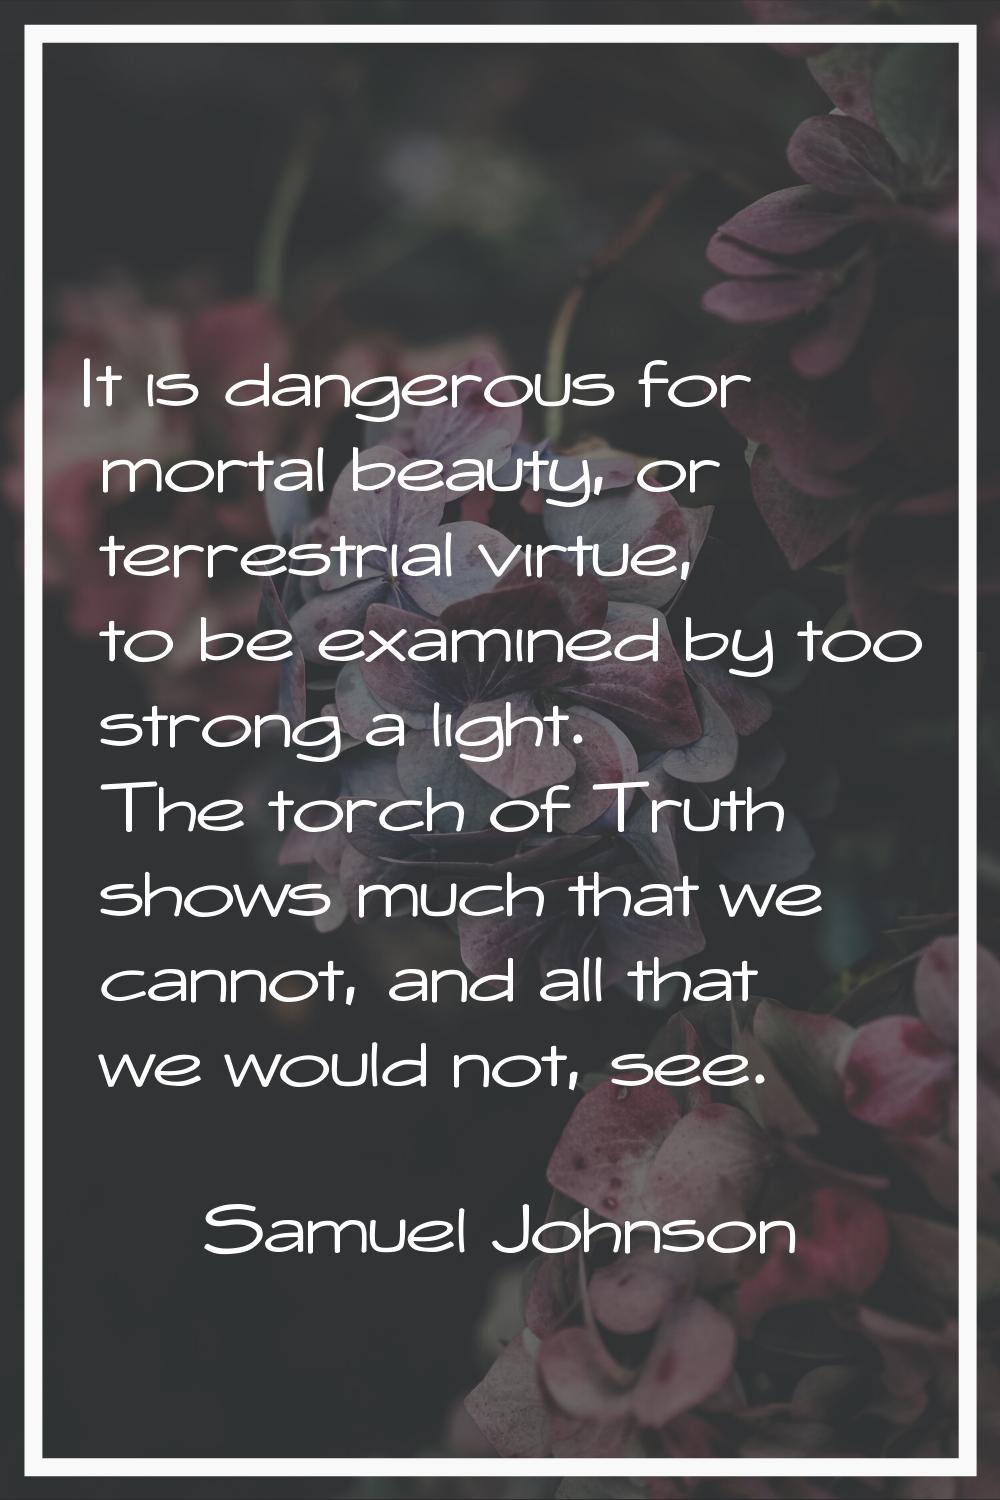 It is dangerous for mortal beauty, or terrestrial virtue, to be examined by too strong a light. The